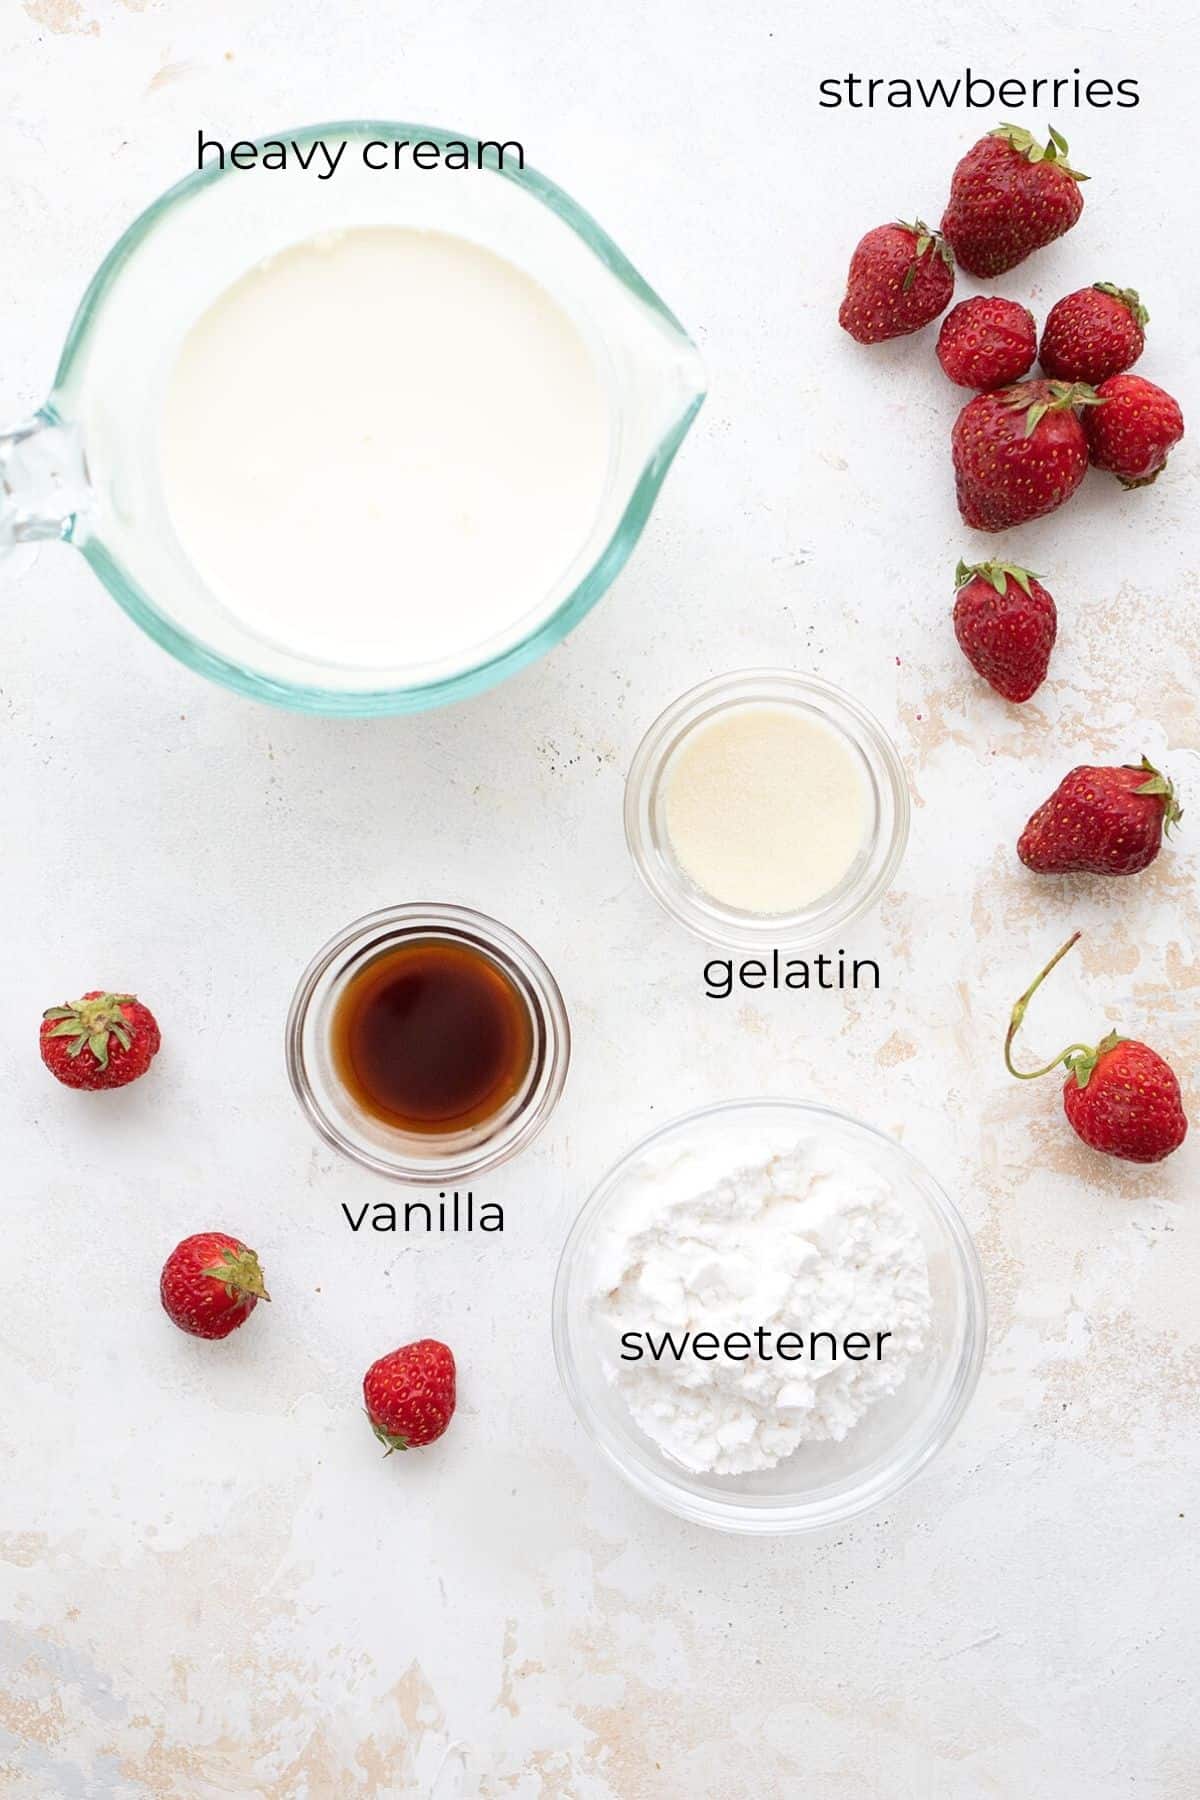 Top down image of the ingredients for keto strawberry panna cotta.